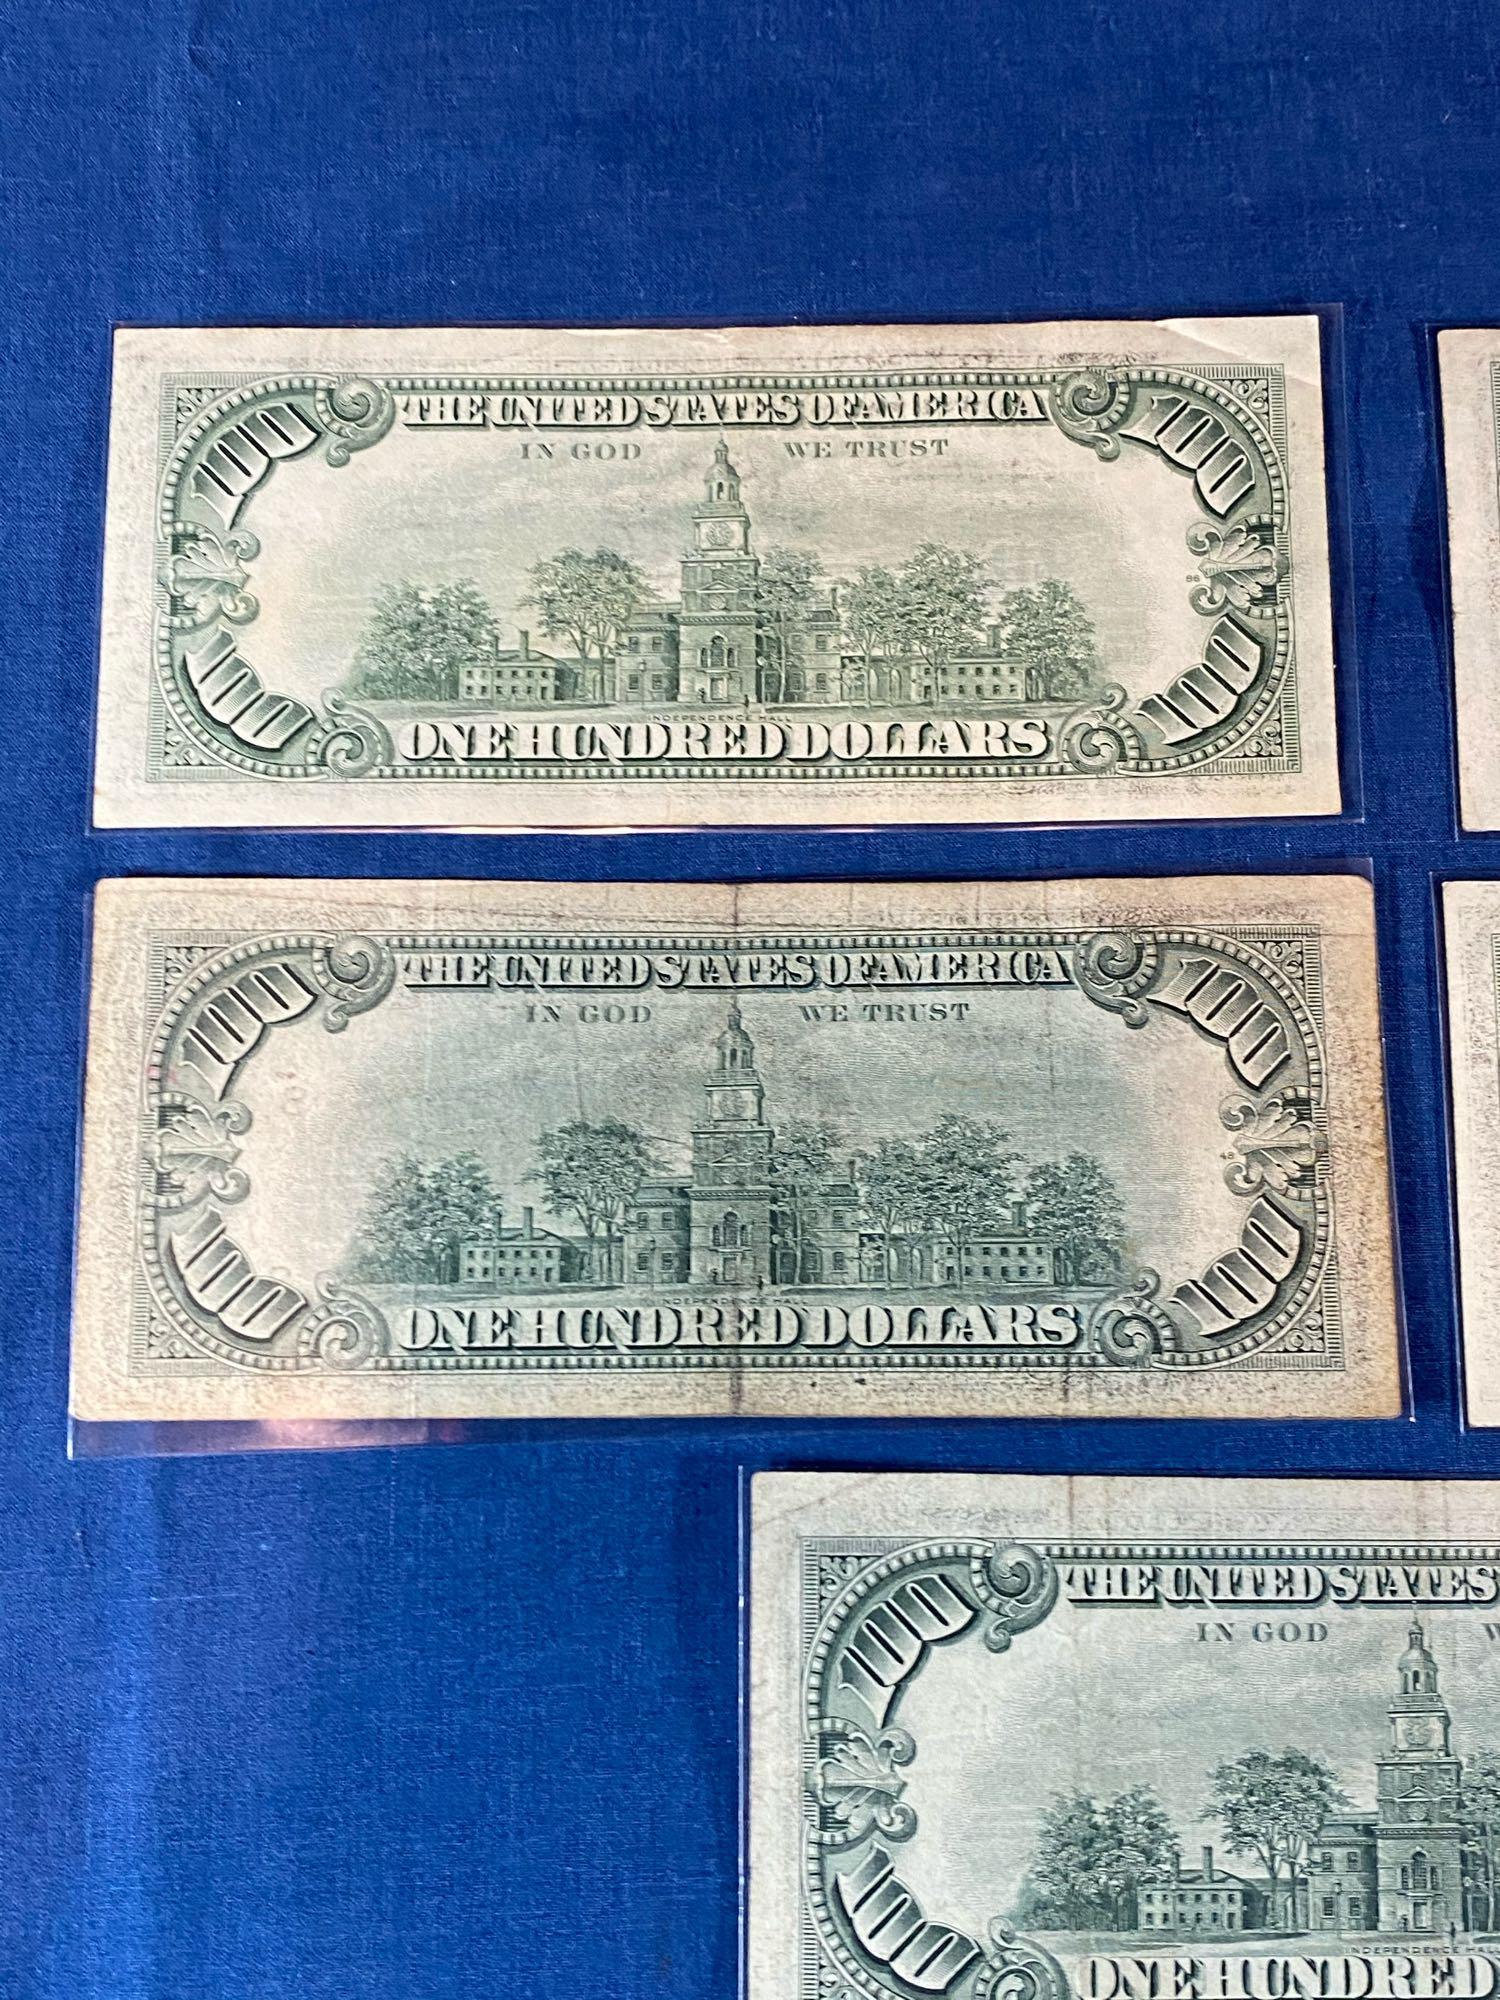 1977 $100 US Federal Reserve Notes